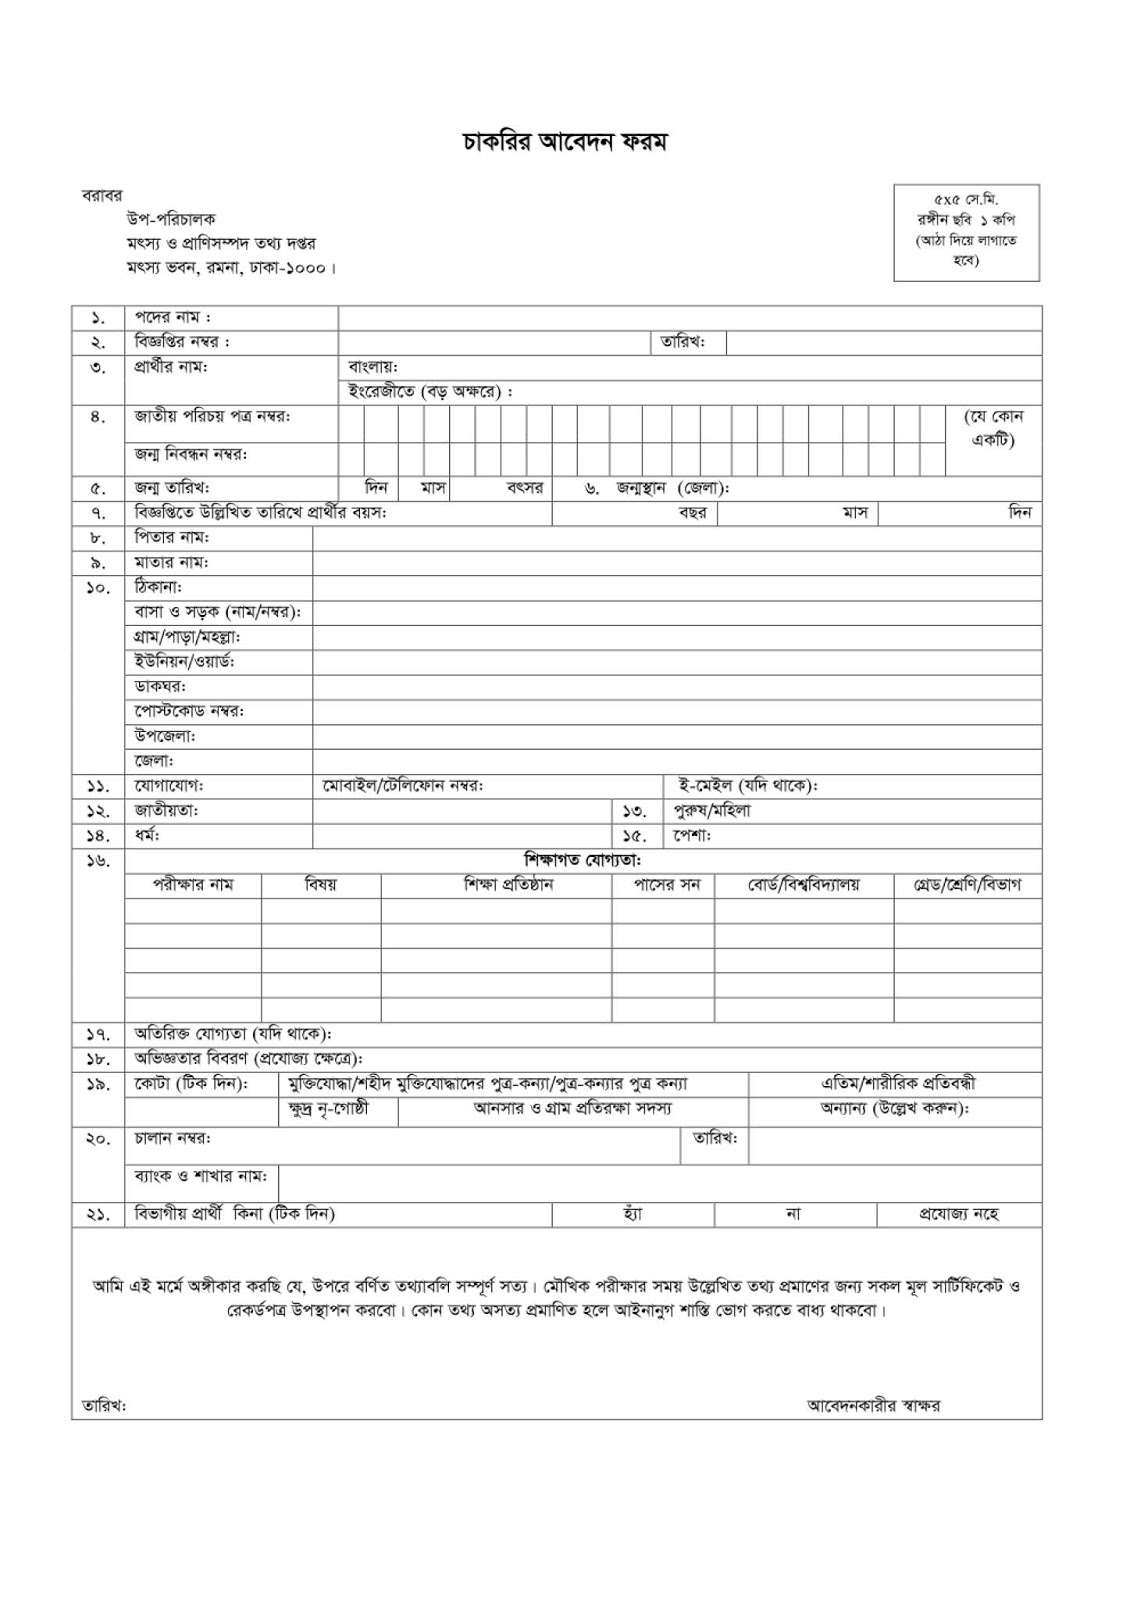 Department of Fisheries and Livestock Information Academy Job Application Form